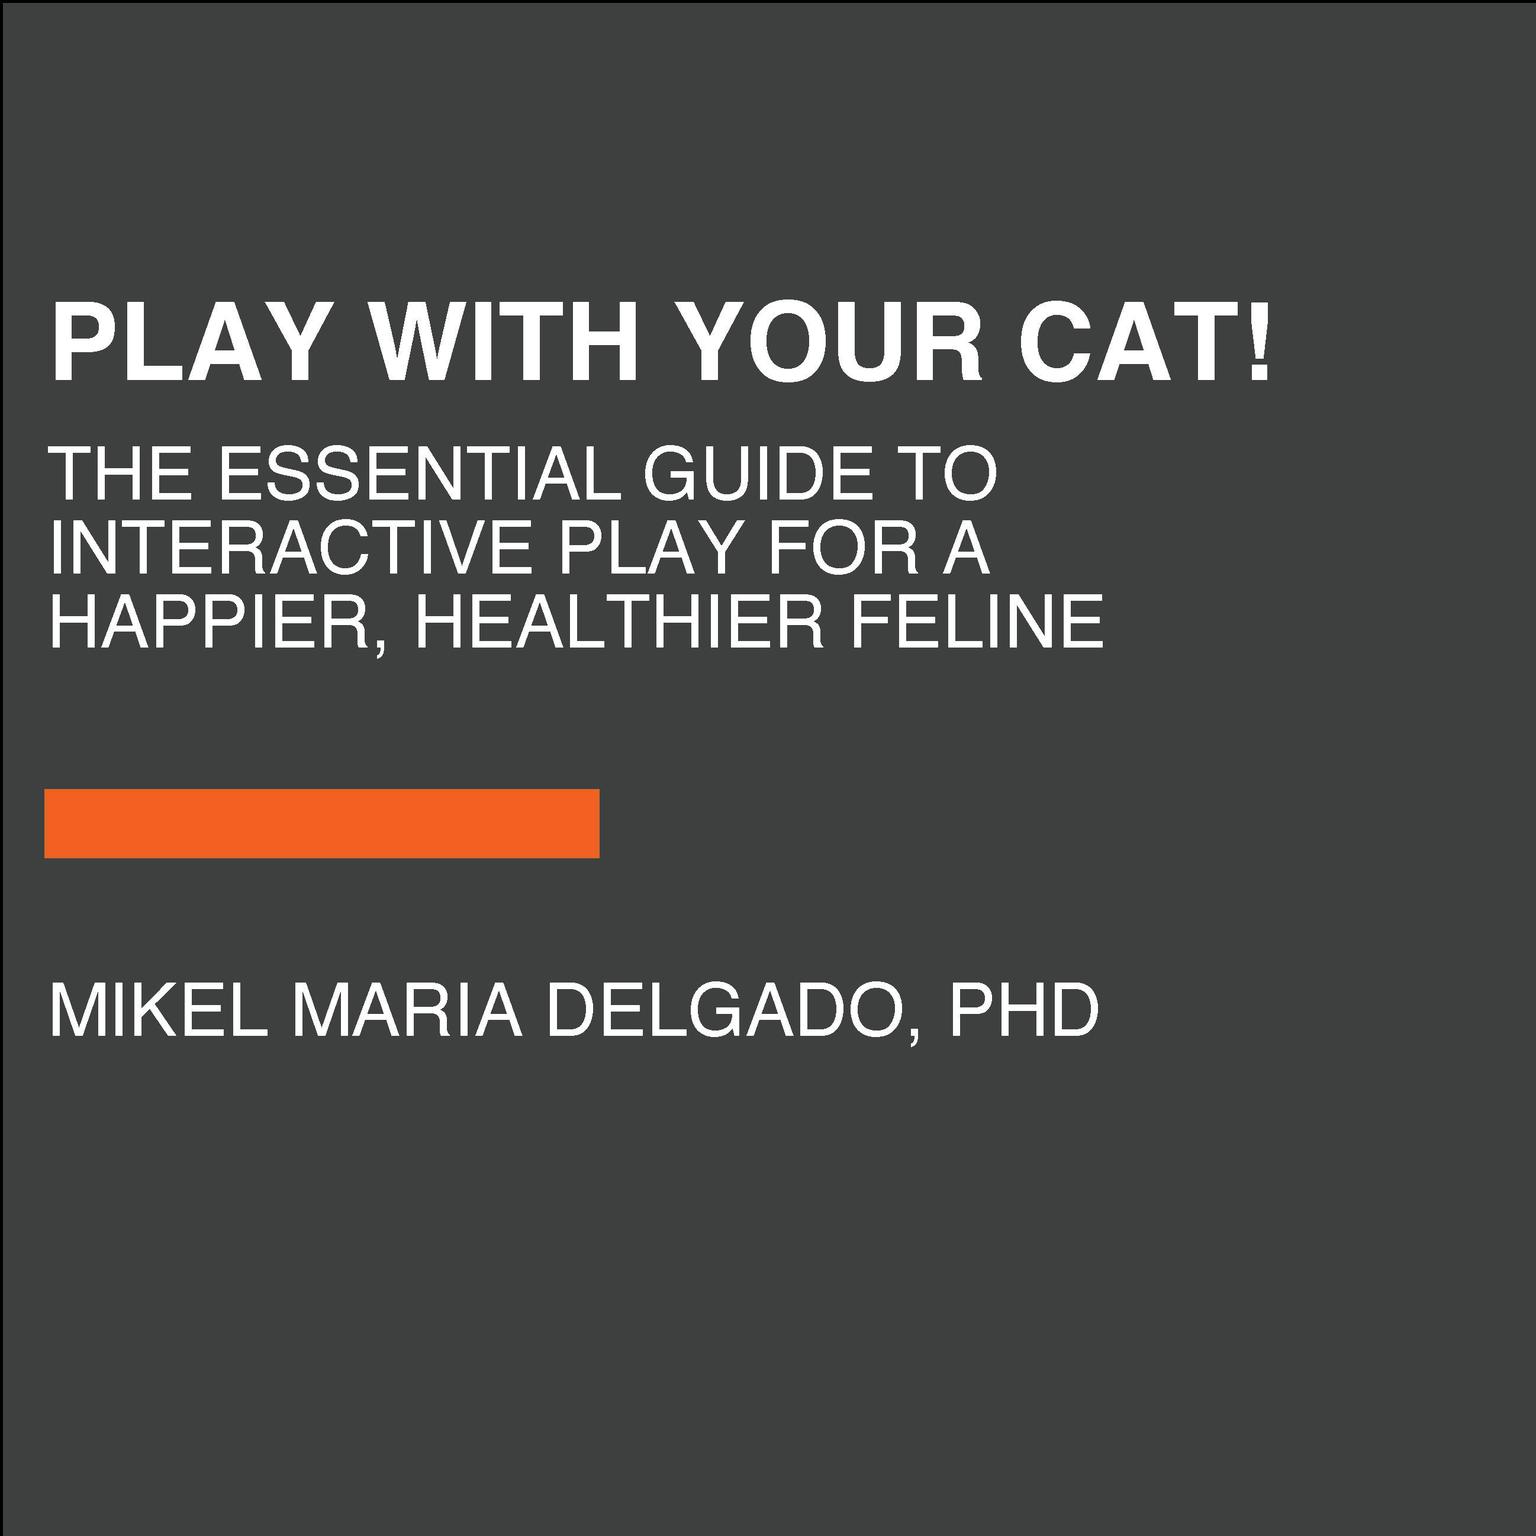 Play With Your Cat!: The Essential Guide to Interactive Play for a Happier, Healthier Feline Audiobook, by Mikel Maria Delgado